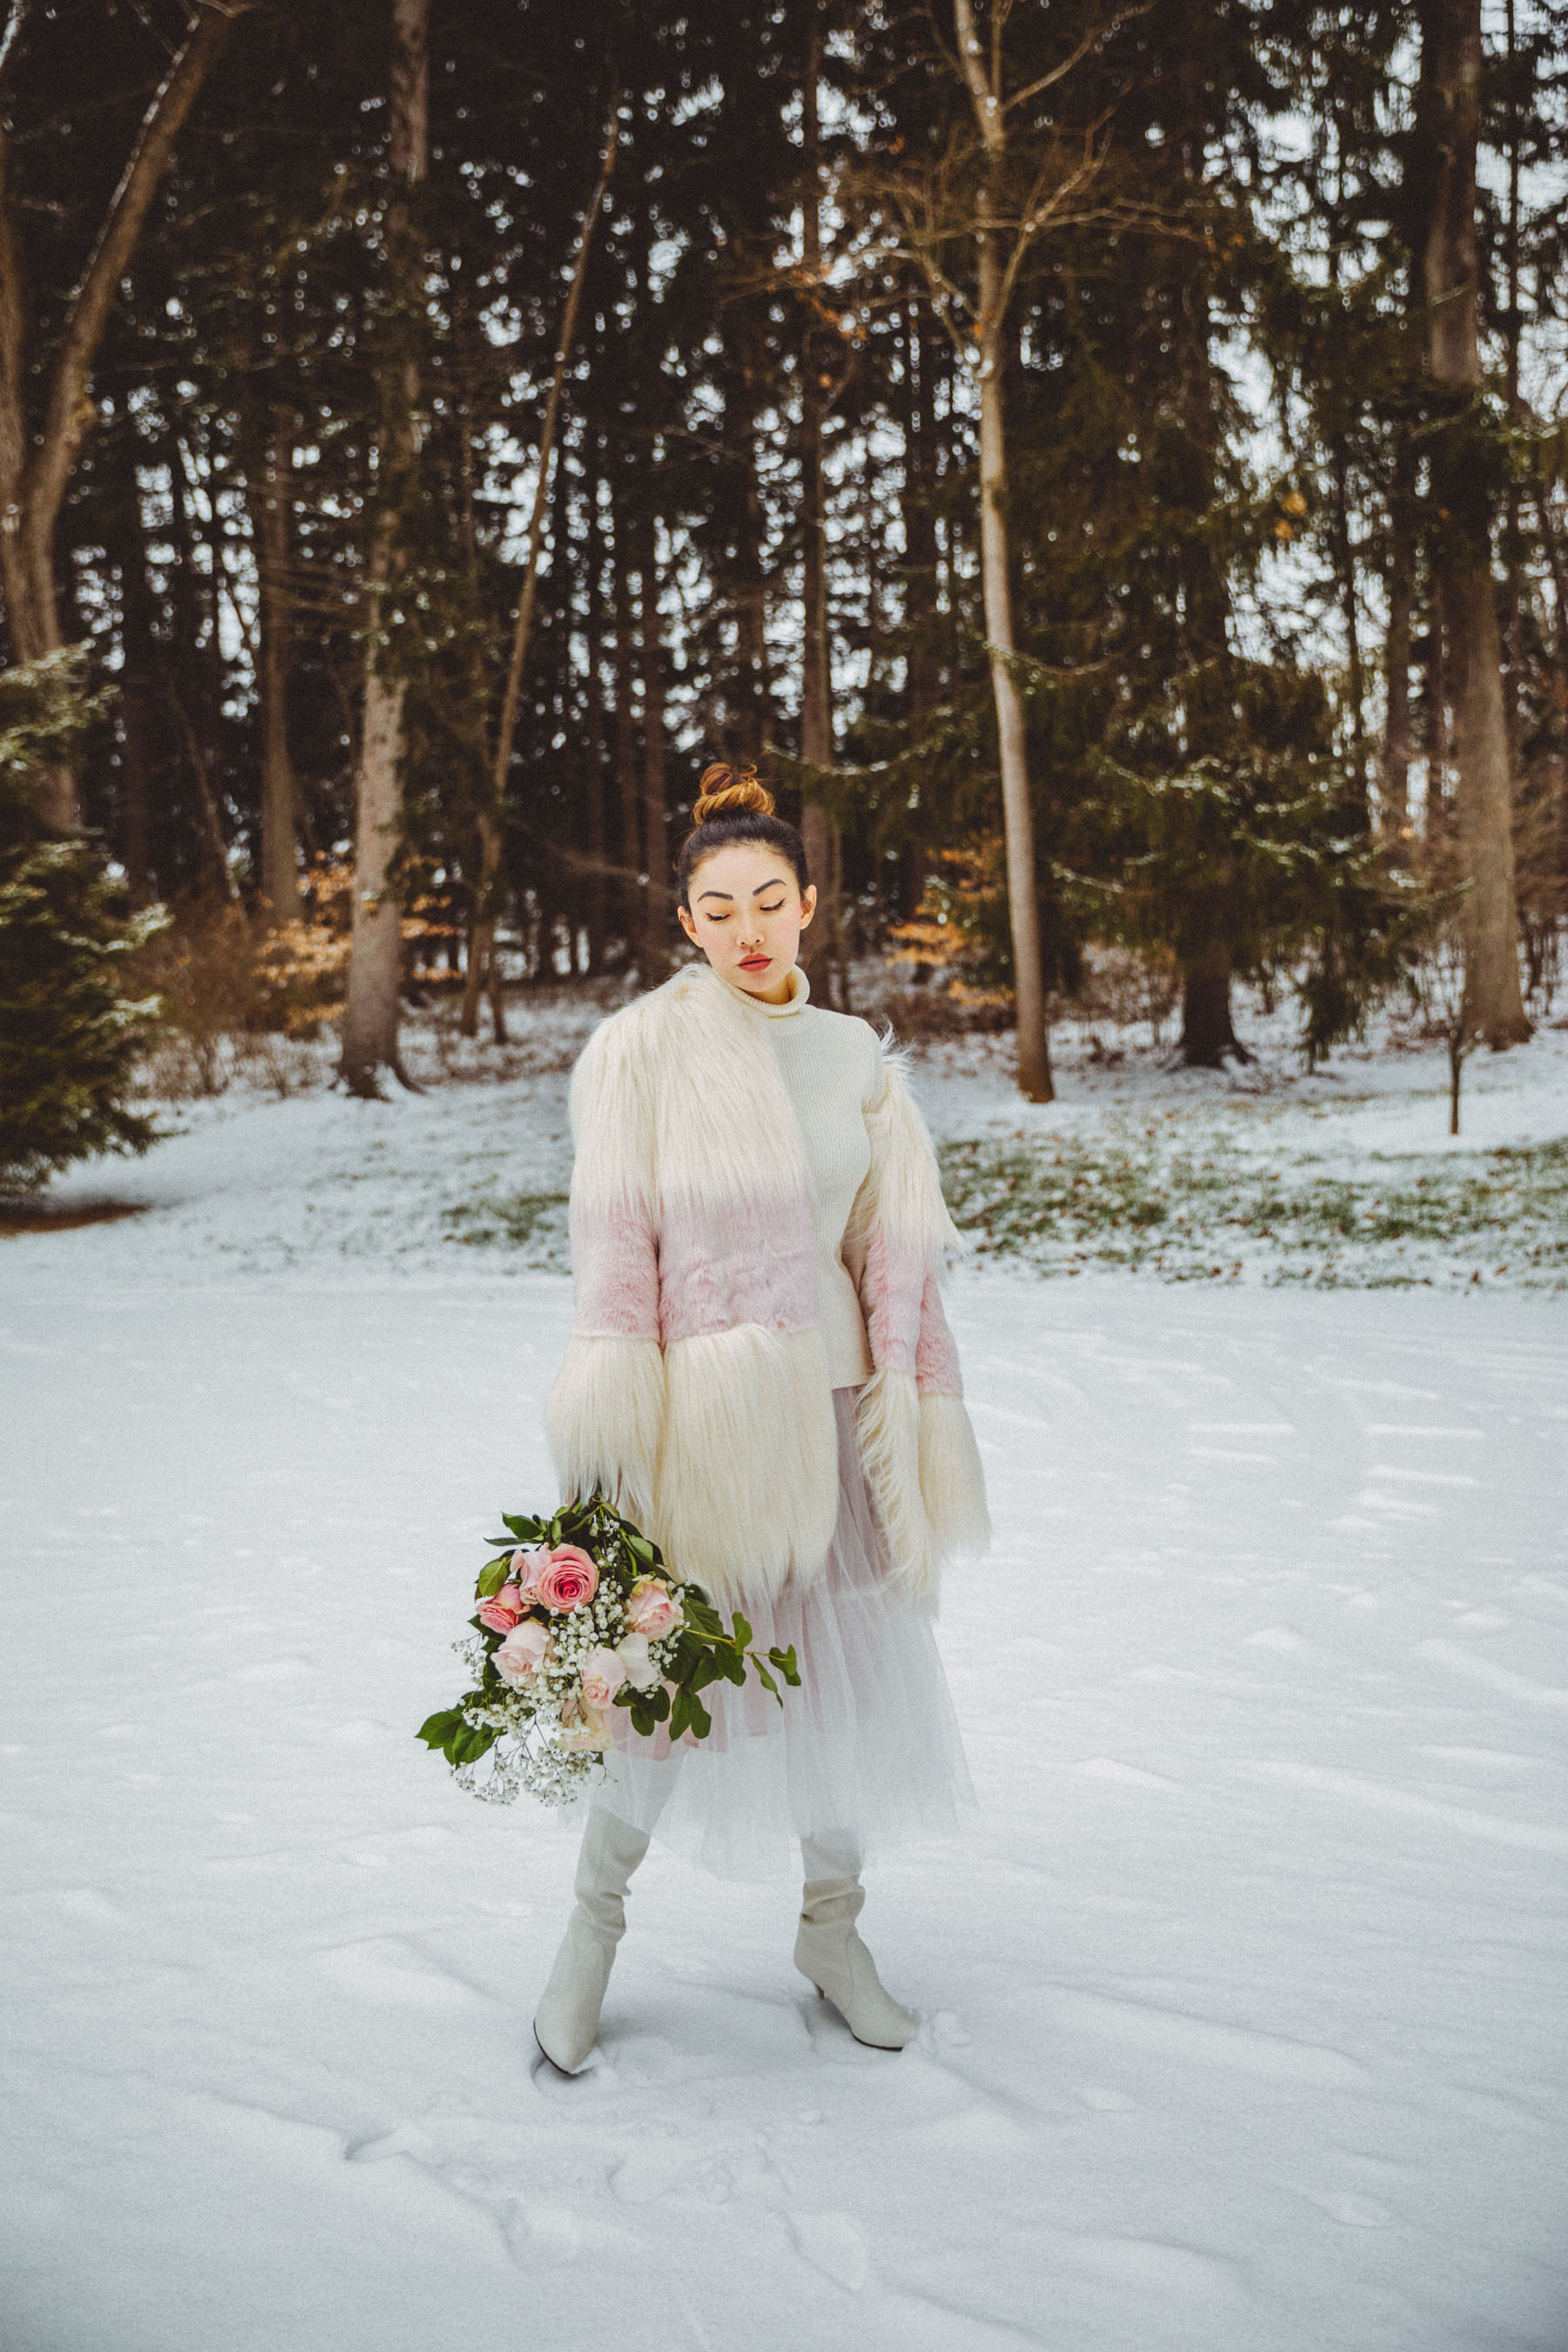 Dressy Winter Looks - White and Pink Fur Coat with Tulle Skirt and White Sweater // Notjessfashion.com // elegant winter outfit, dressy outfits for the snow, snow outfit, tulle midi skirt, white boots, winter white outfit, asian blogger, new york fashion blogger, winter fashion editorial